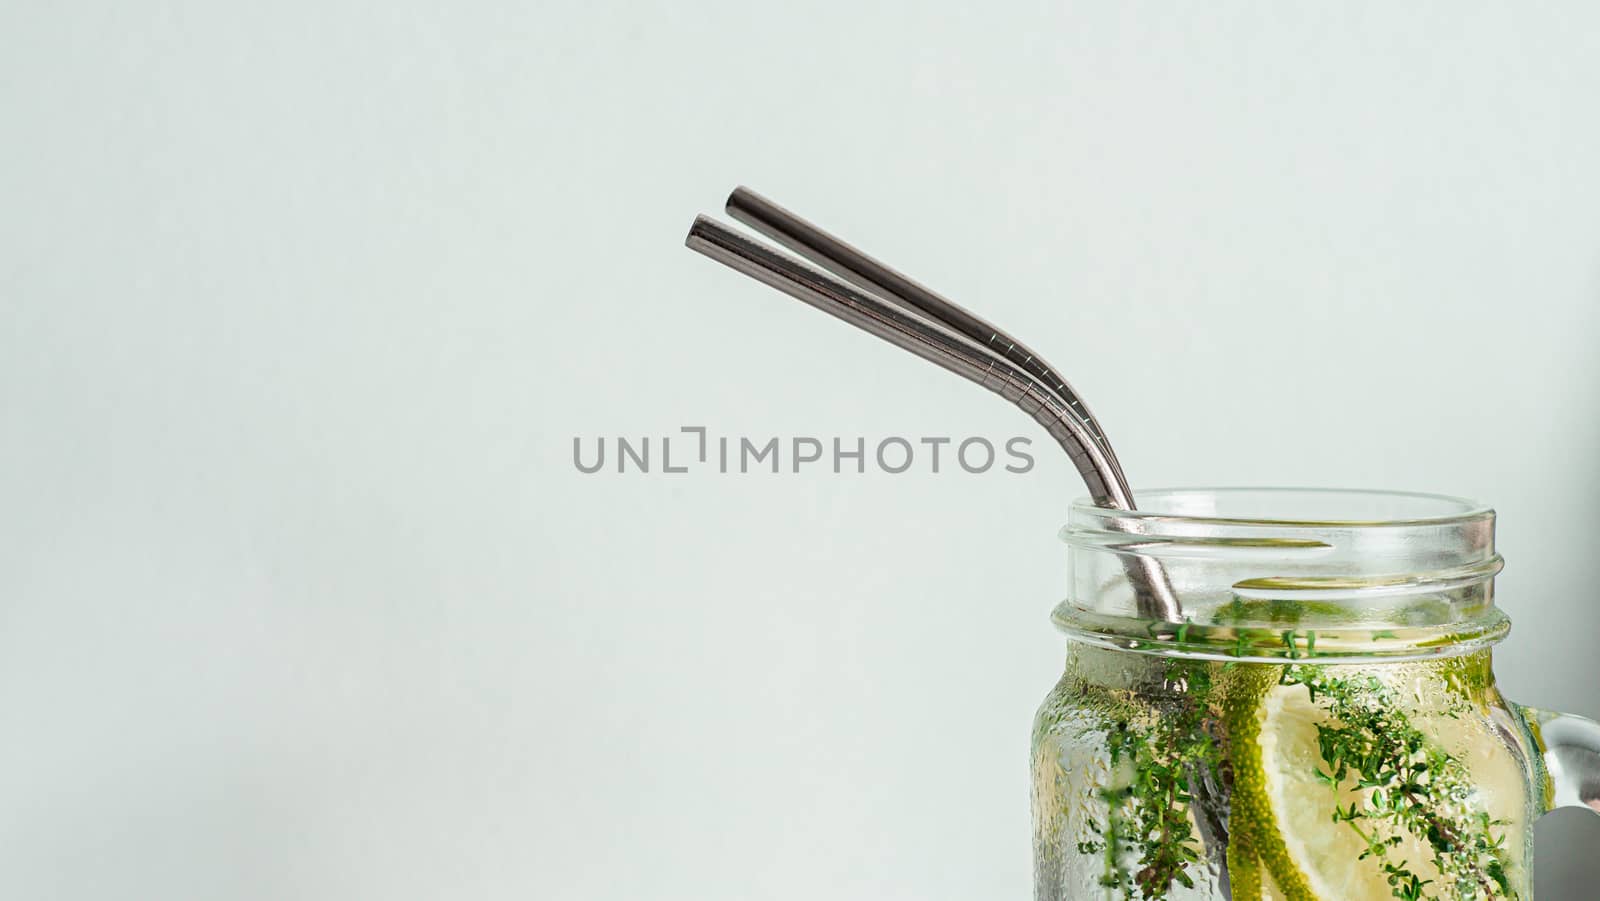 Cold drink in mason jar with metal straw on white background. Lemonade or detox water with lime and thyme in glass jar with copy space for text or design. Recyclable straws, zero waste concept. Banner